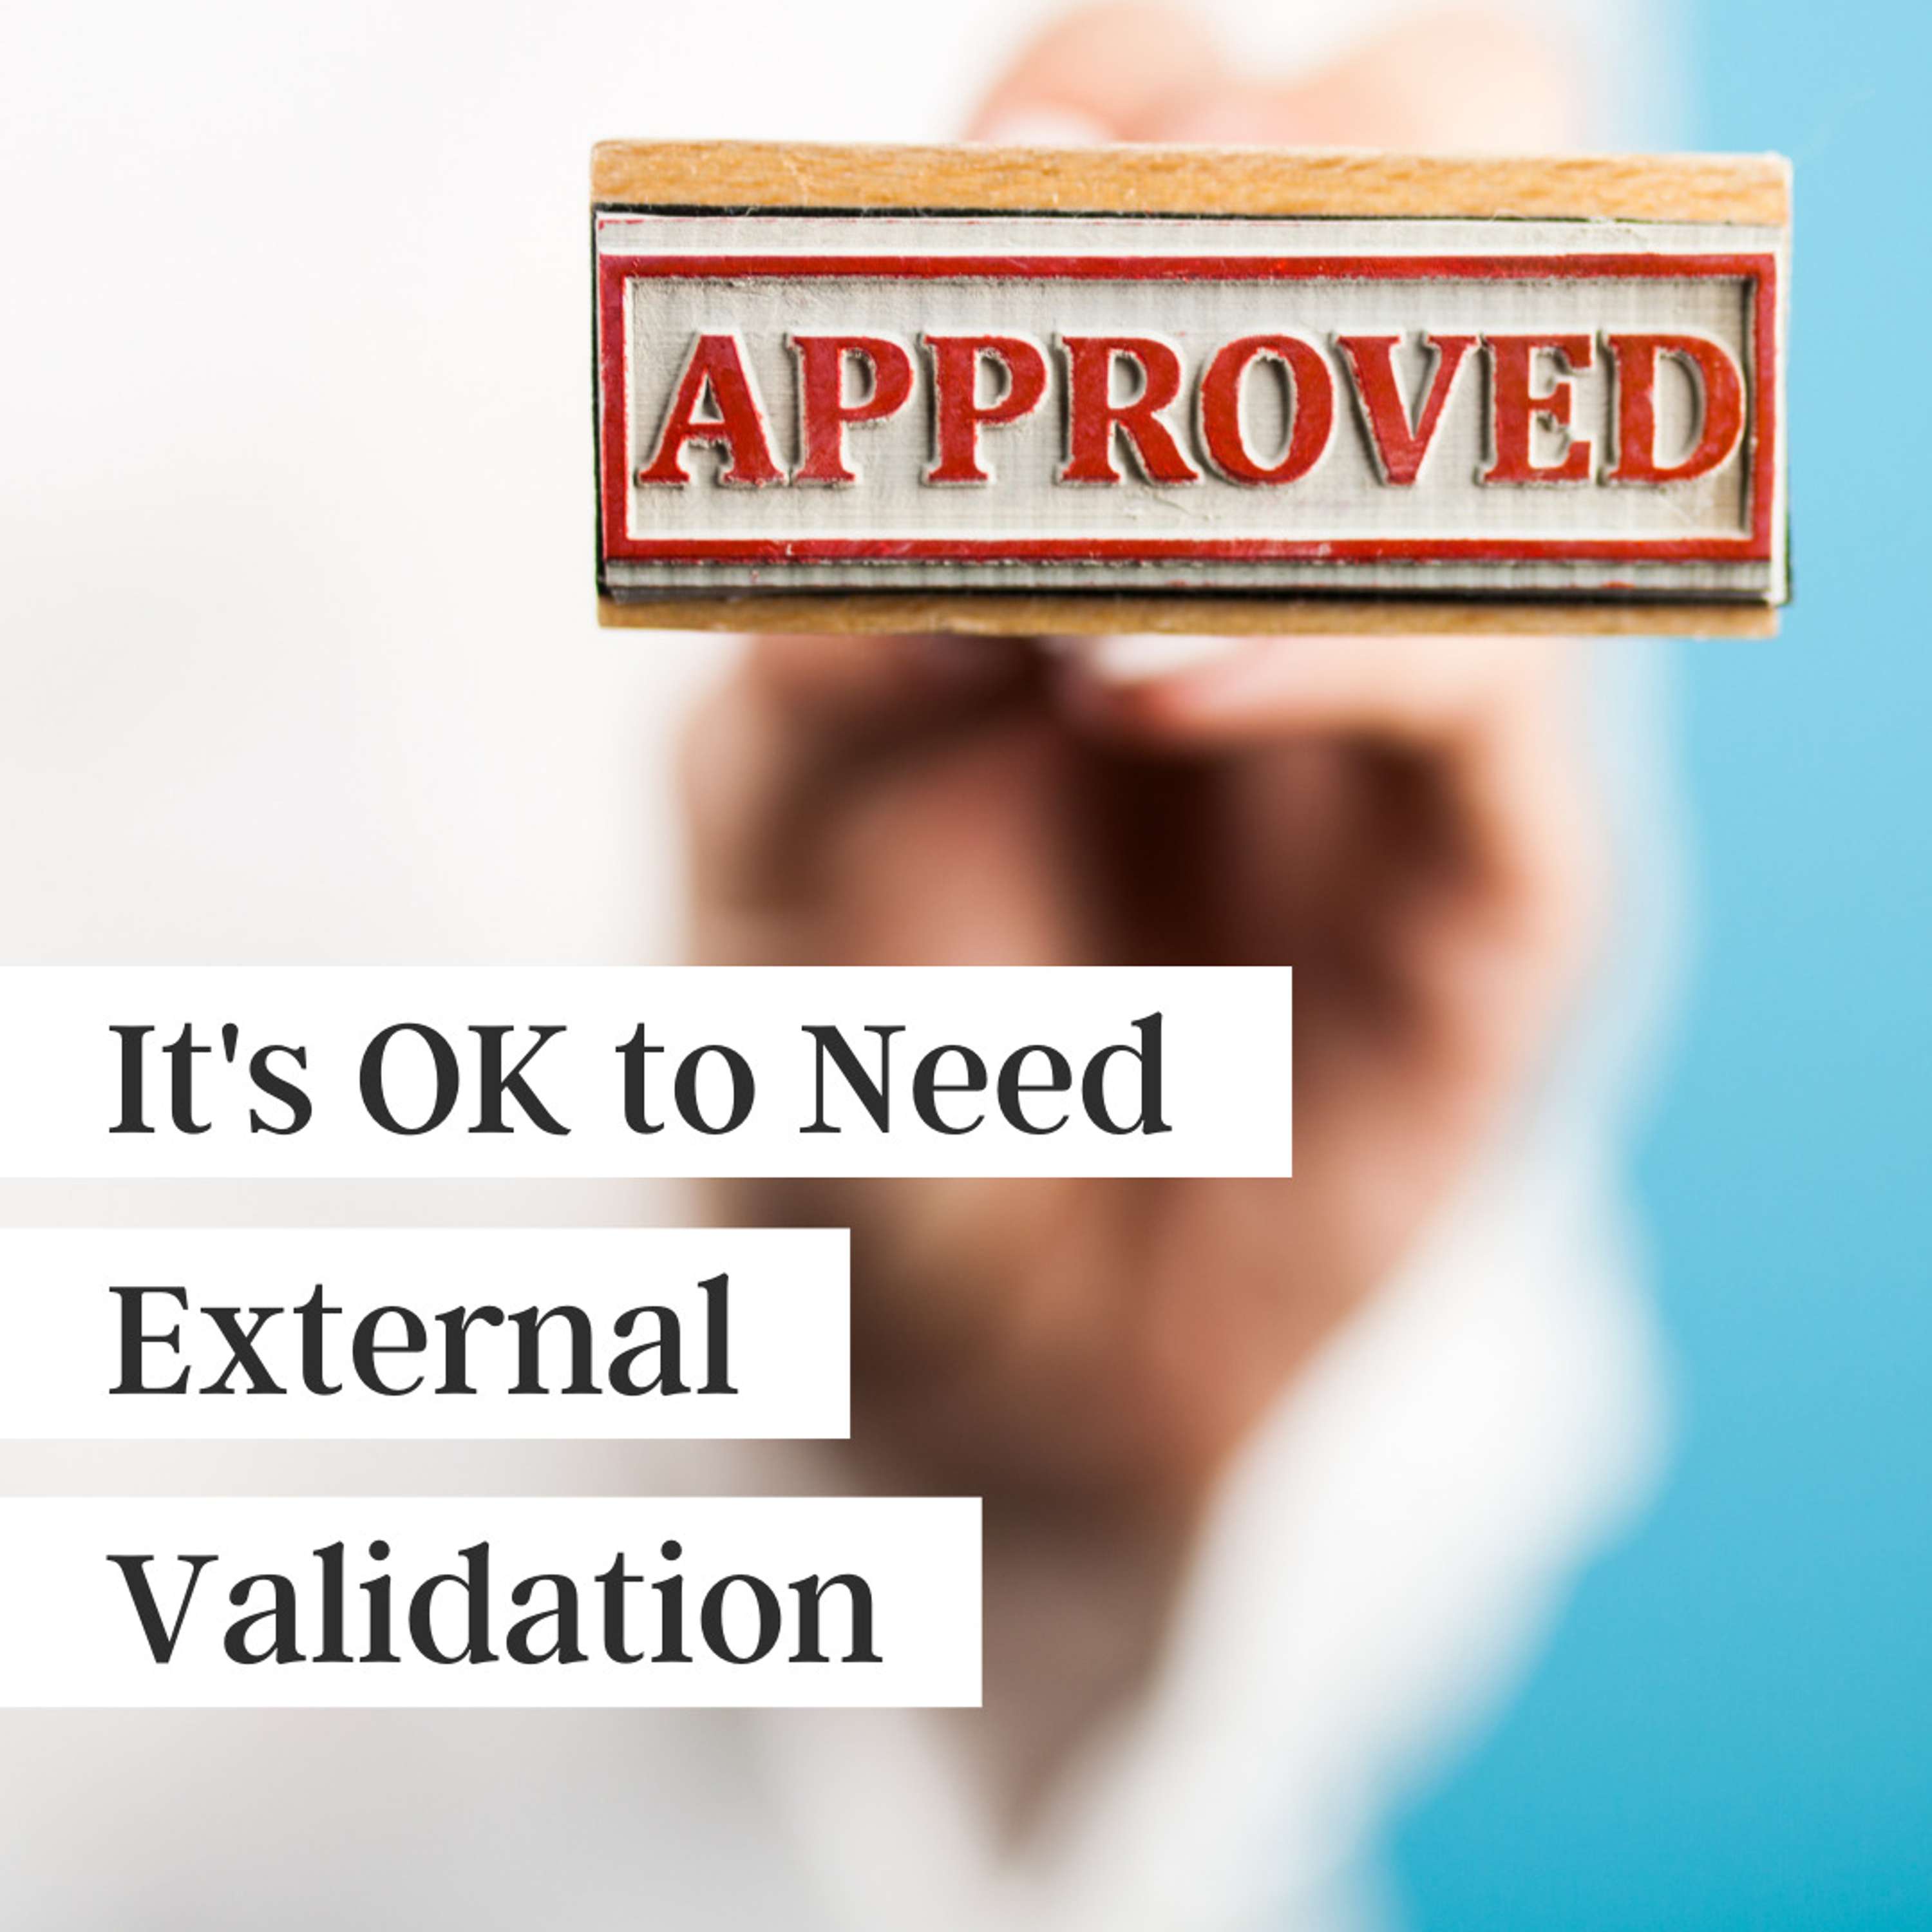 29. Why It’s Not Bad to Need External Validation